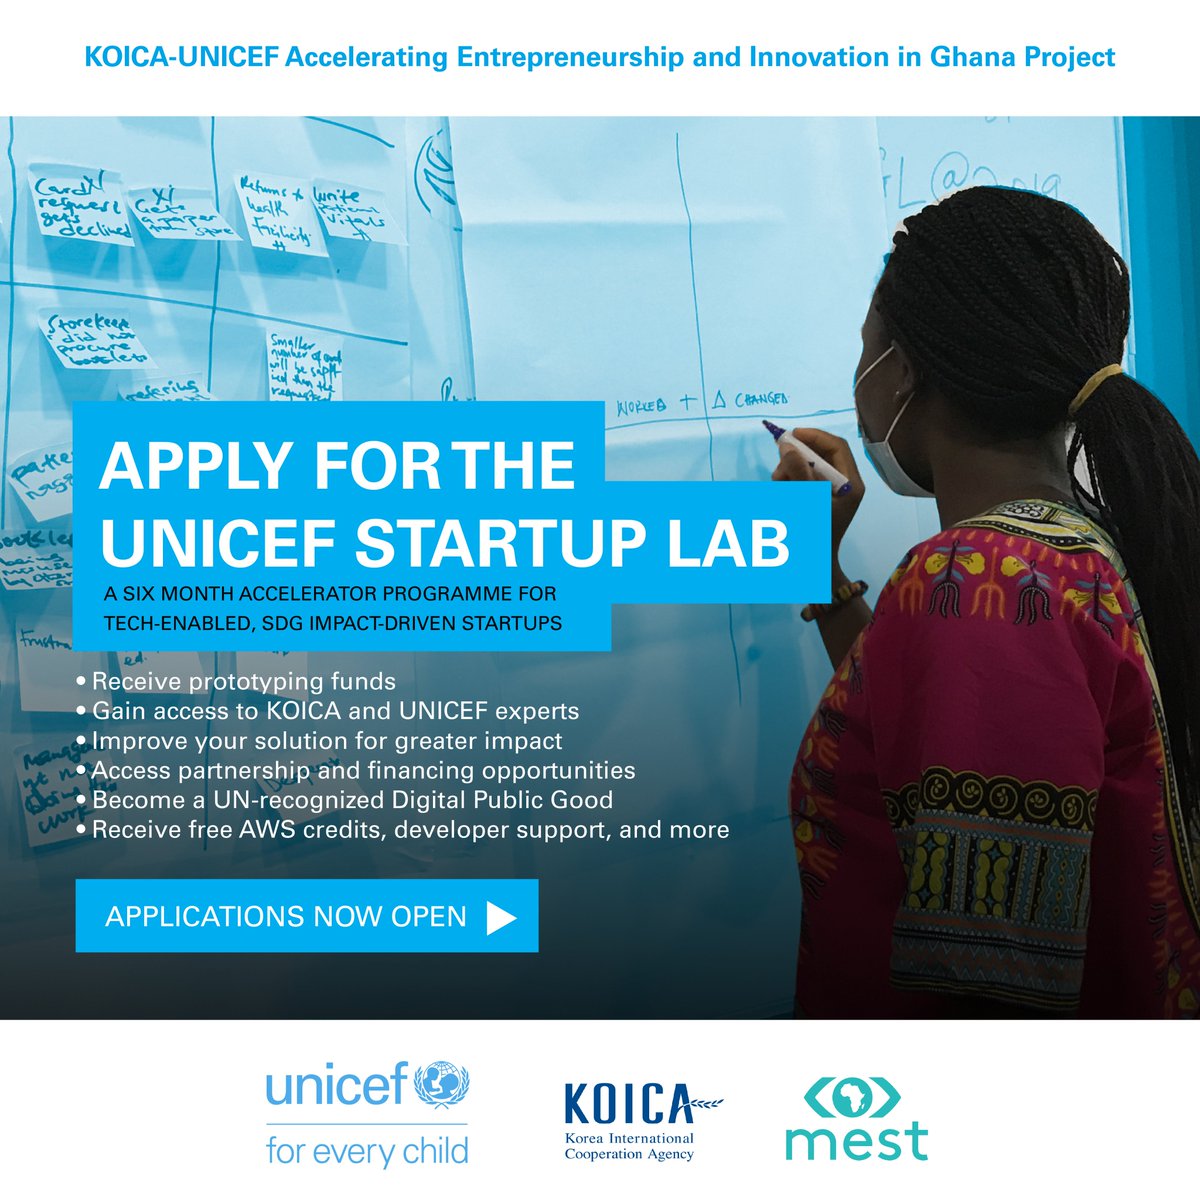 🗣️Attention #Ghana startups🇬🇭 Want to seize the benefits of #OpenSource and #DPGs? Interested in prototype funding? Applications are open for @UNICEFStartups new accelerator program! Apply by Oct 21 to work w/ @UNICEFGhana,@MESTAfrica & KOICA experts ➡️unicefstartuplab.org